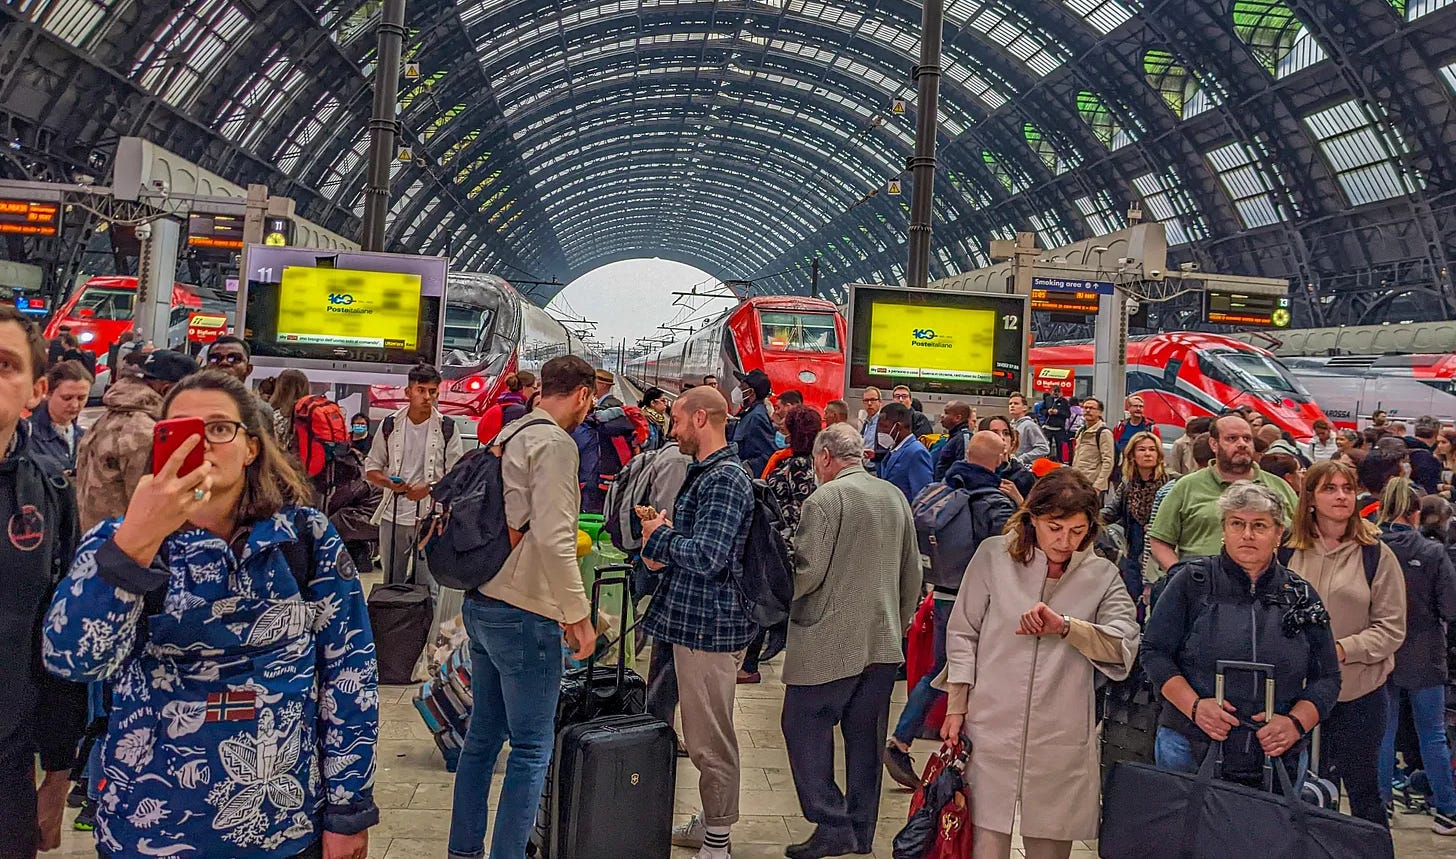 Milano train station packed with tourists